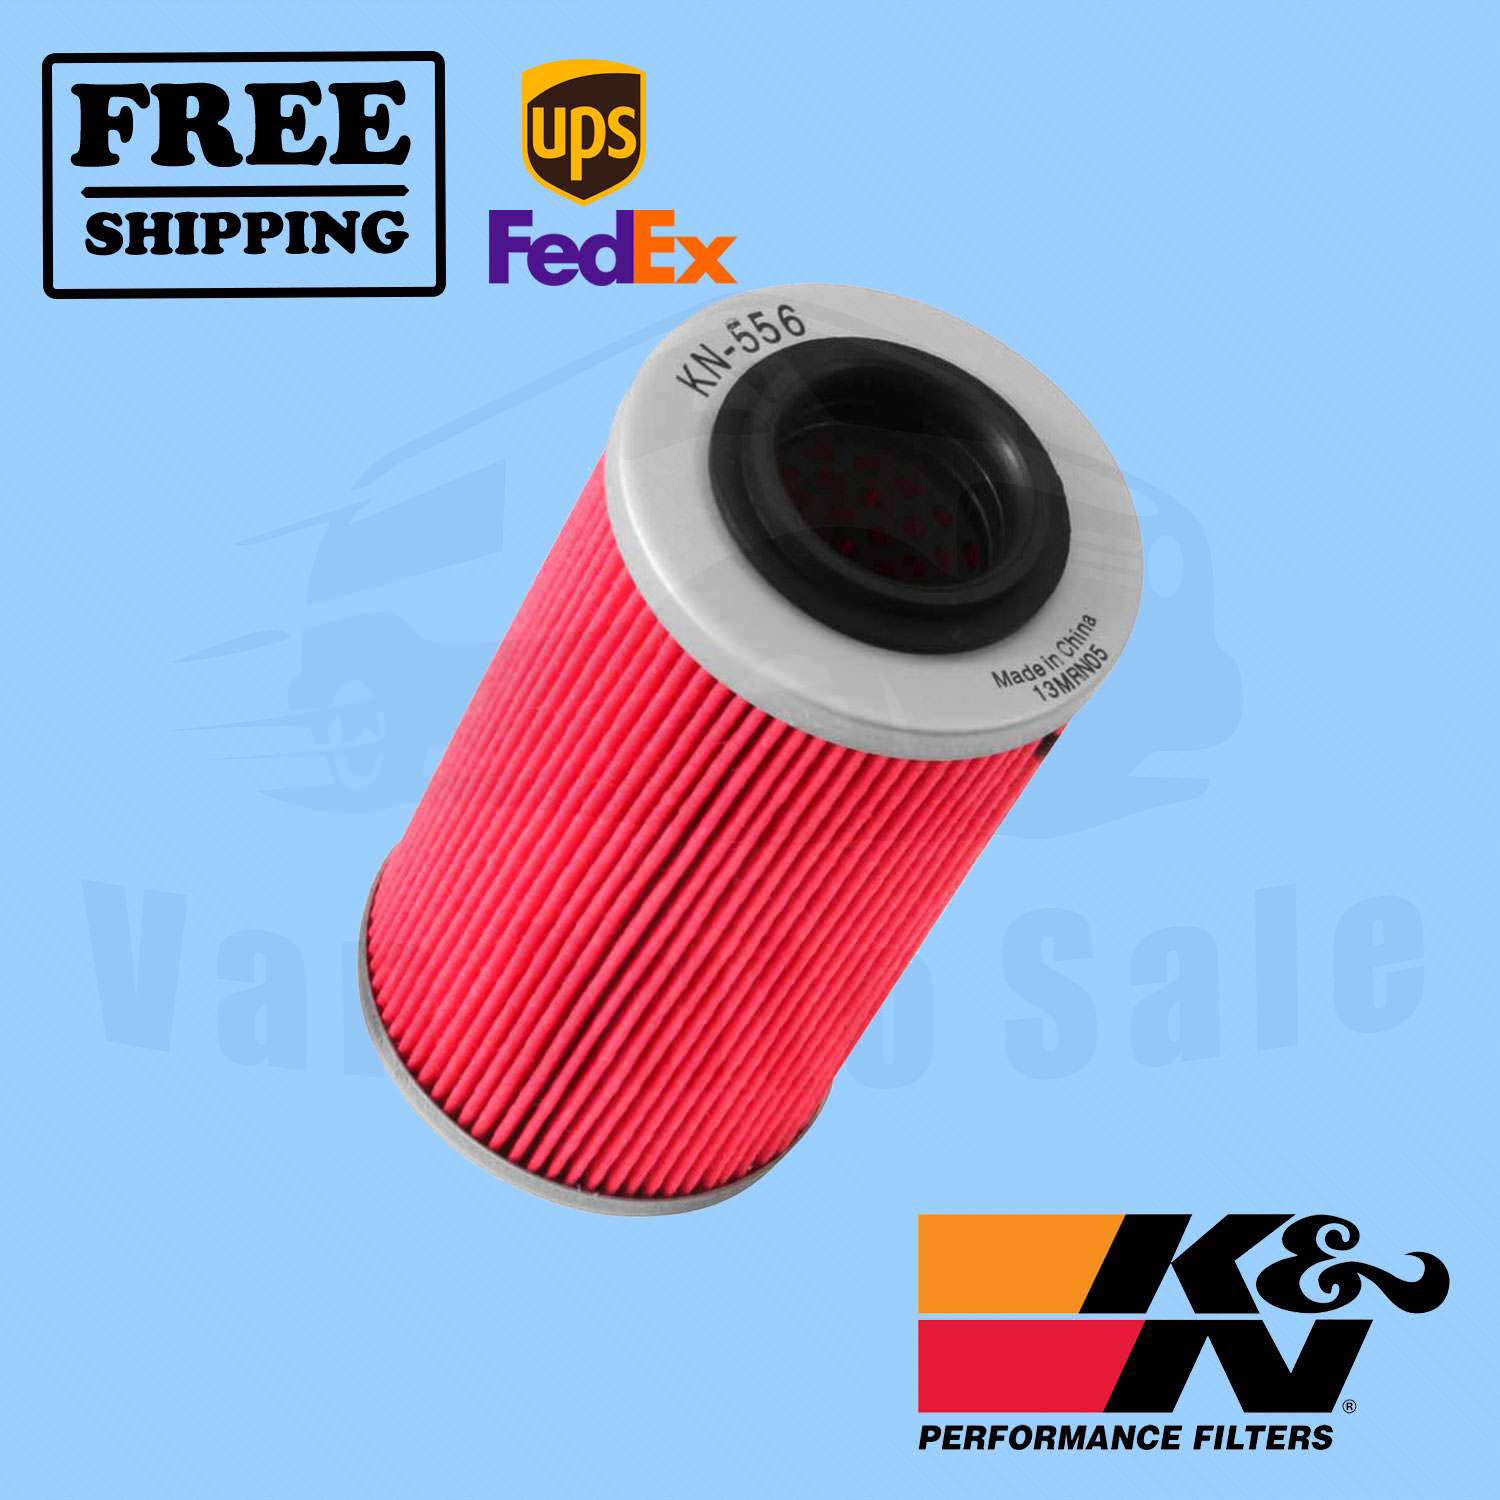 KN-556 Details about   K&N Oil Filter FOR SEA DOO GTS 130 1503